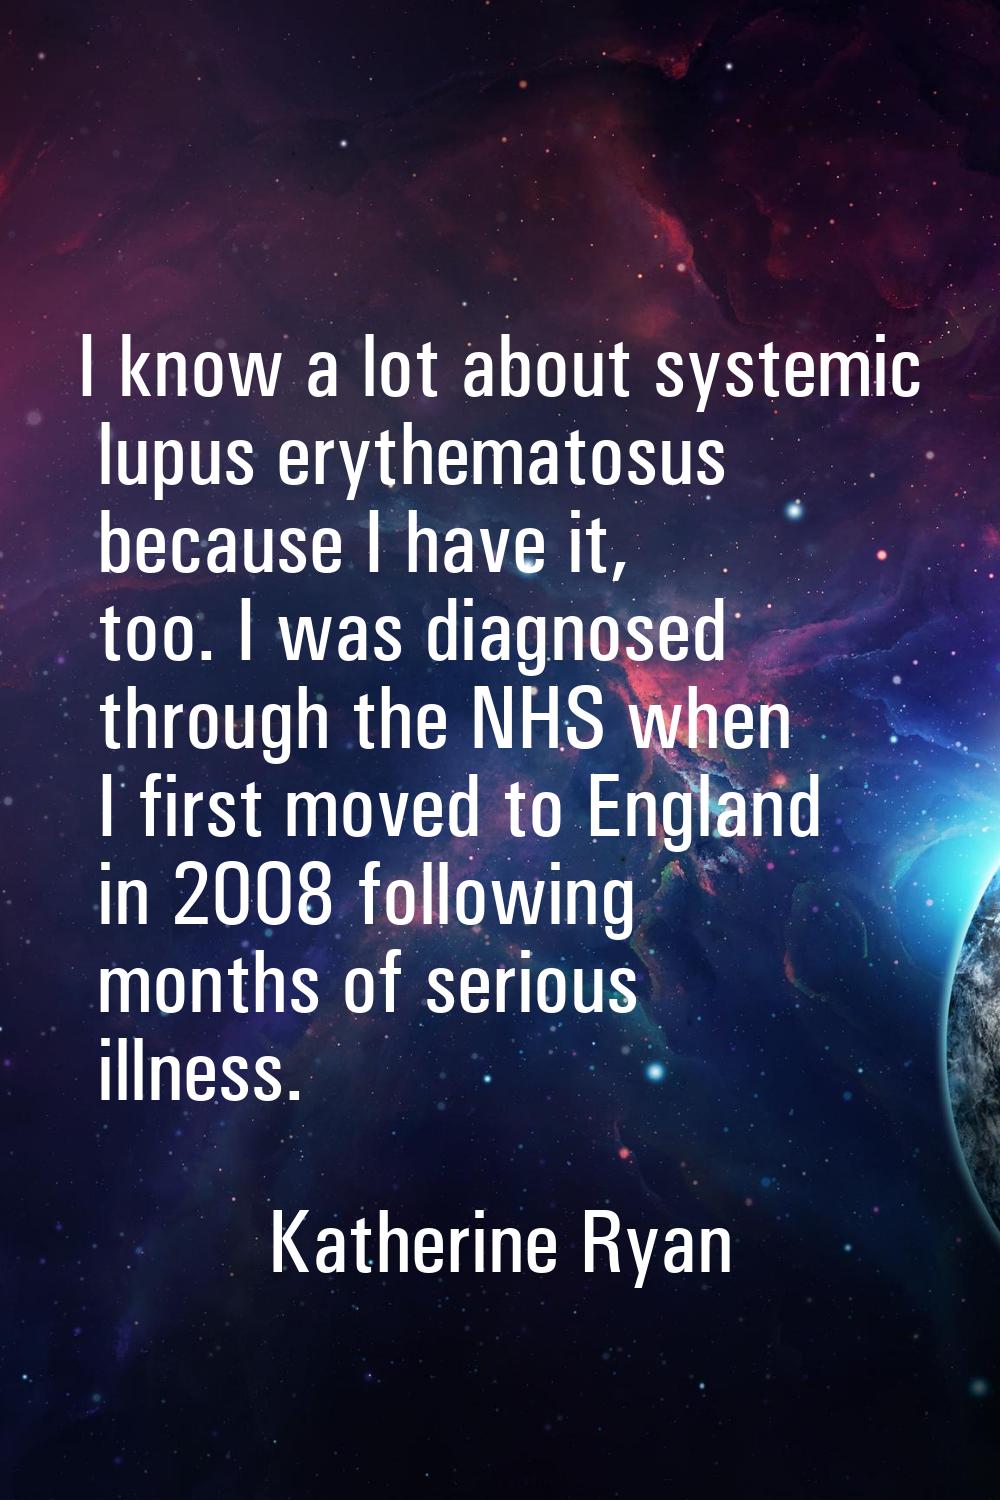 I know a lot about systemic lupus erythematosus because I have it, too. I was diagnosed through the